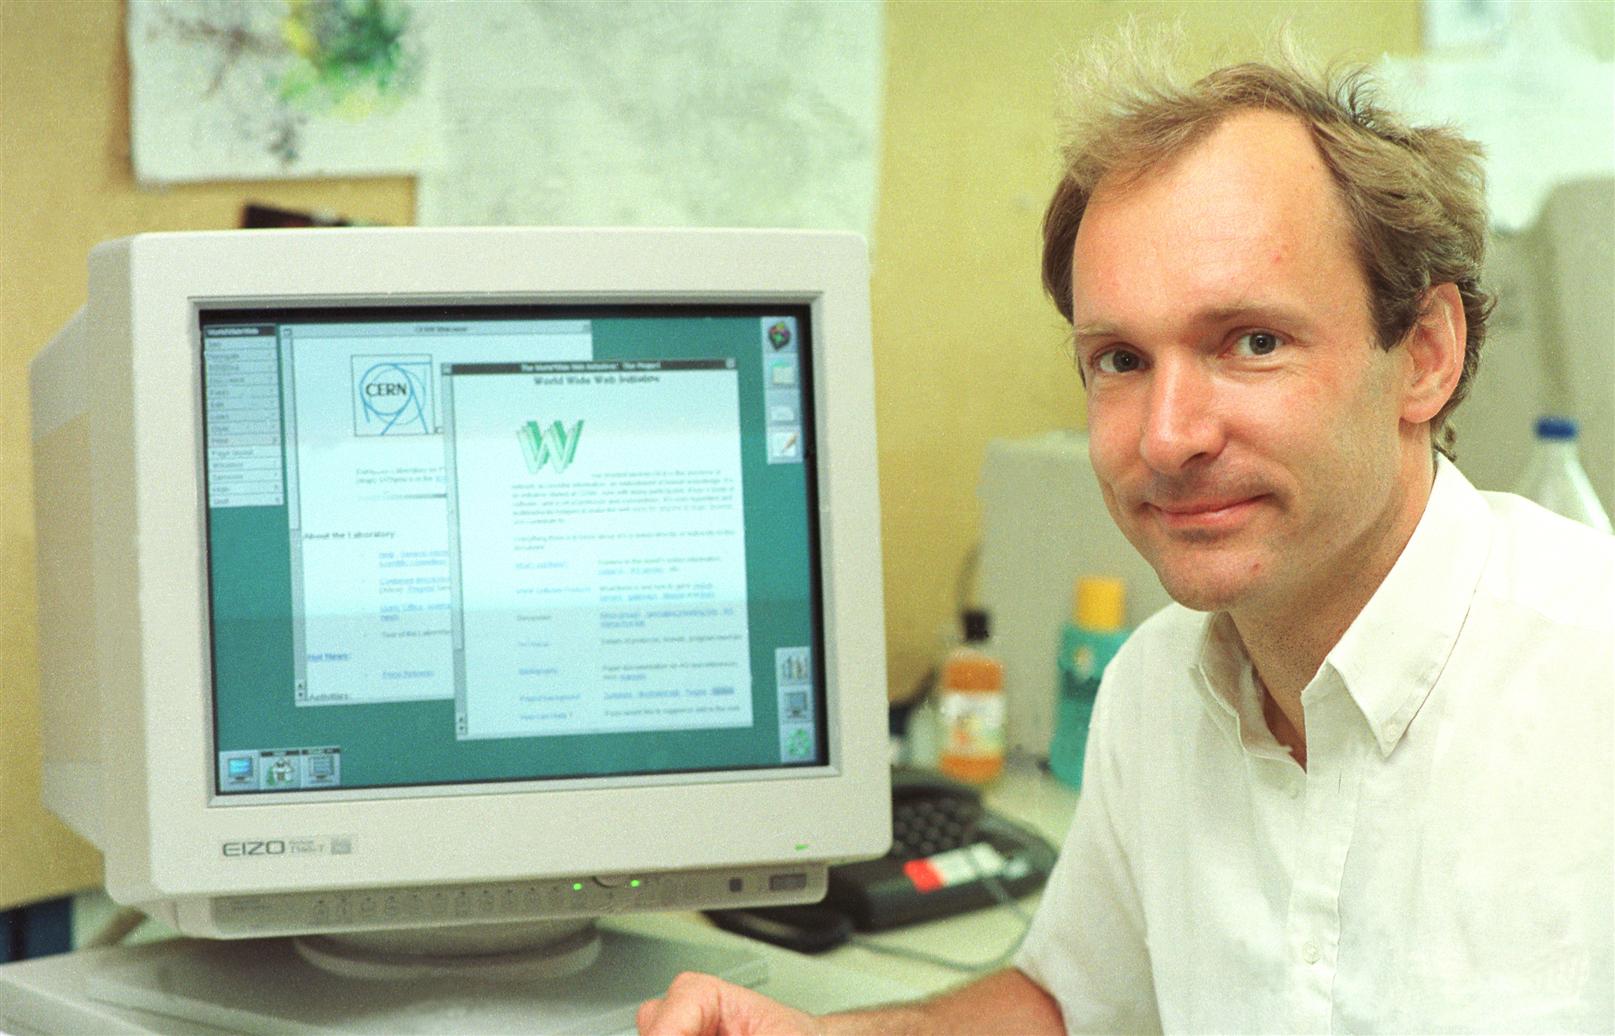 Image of Timothy Berners-Lee next to the world-wide-web